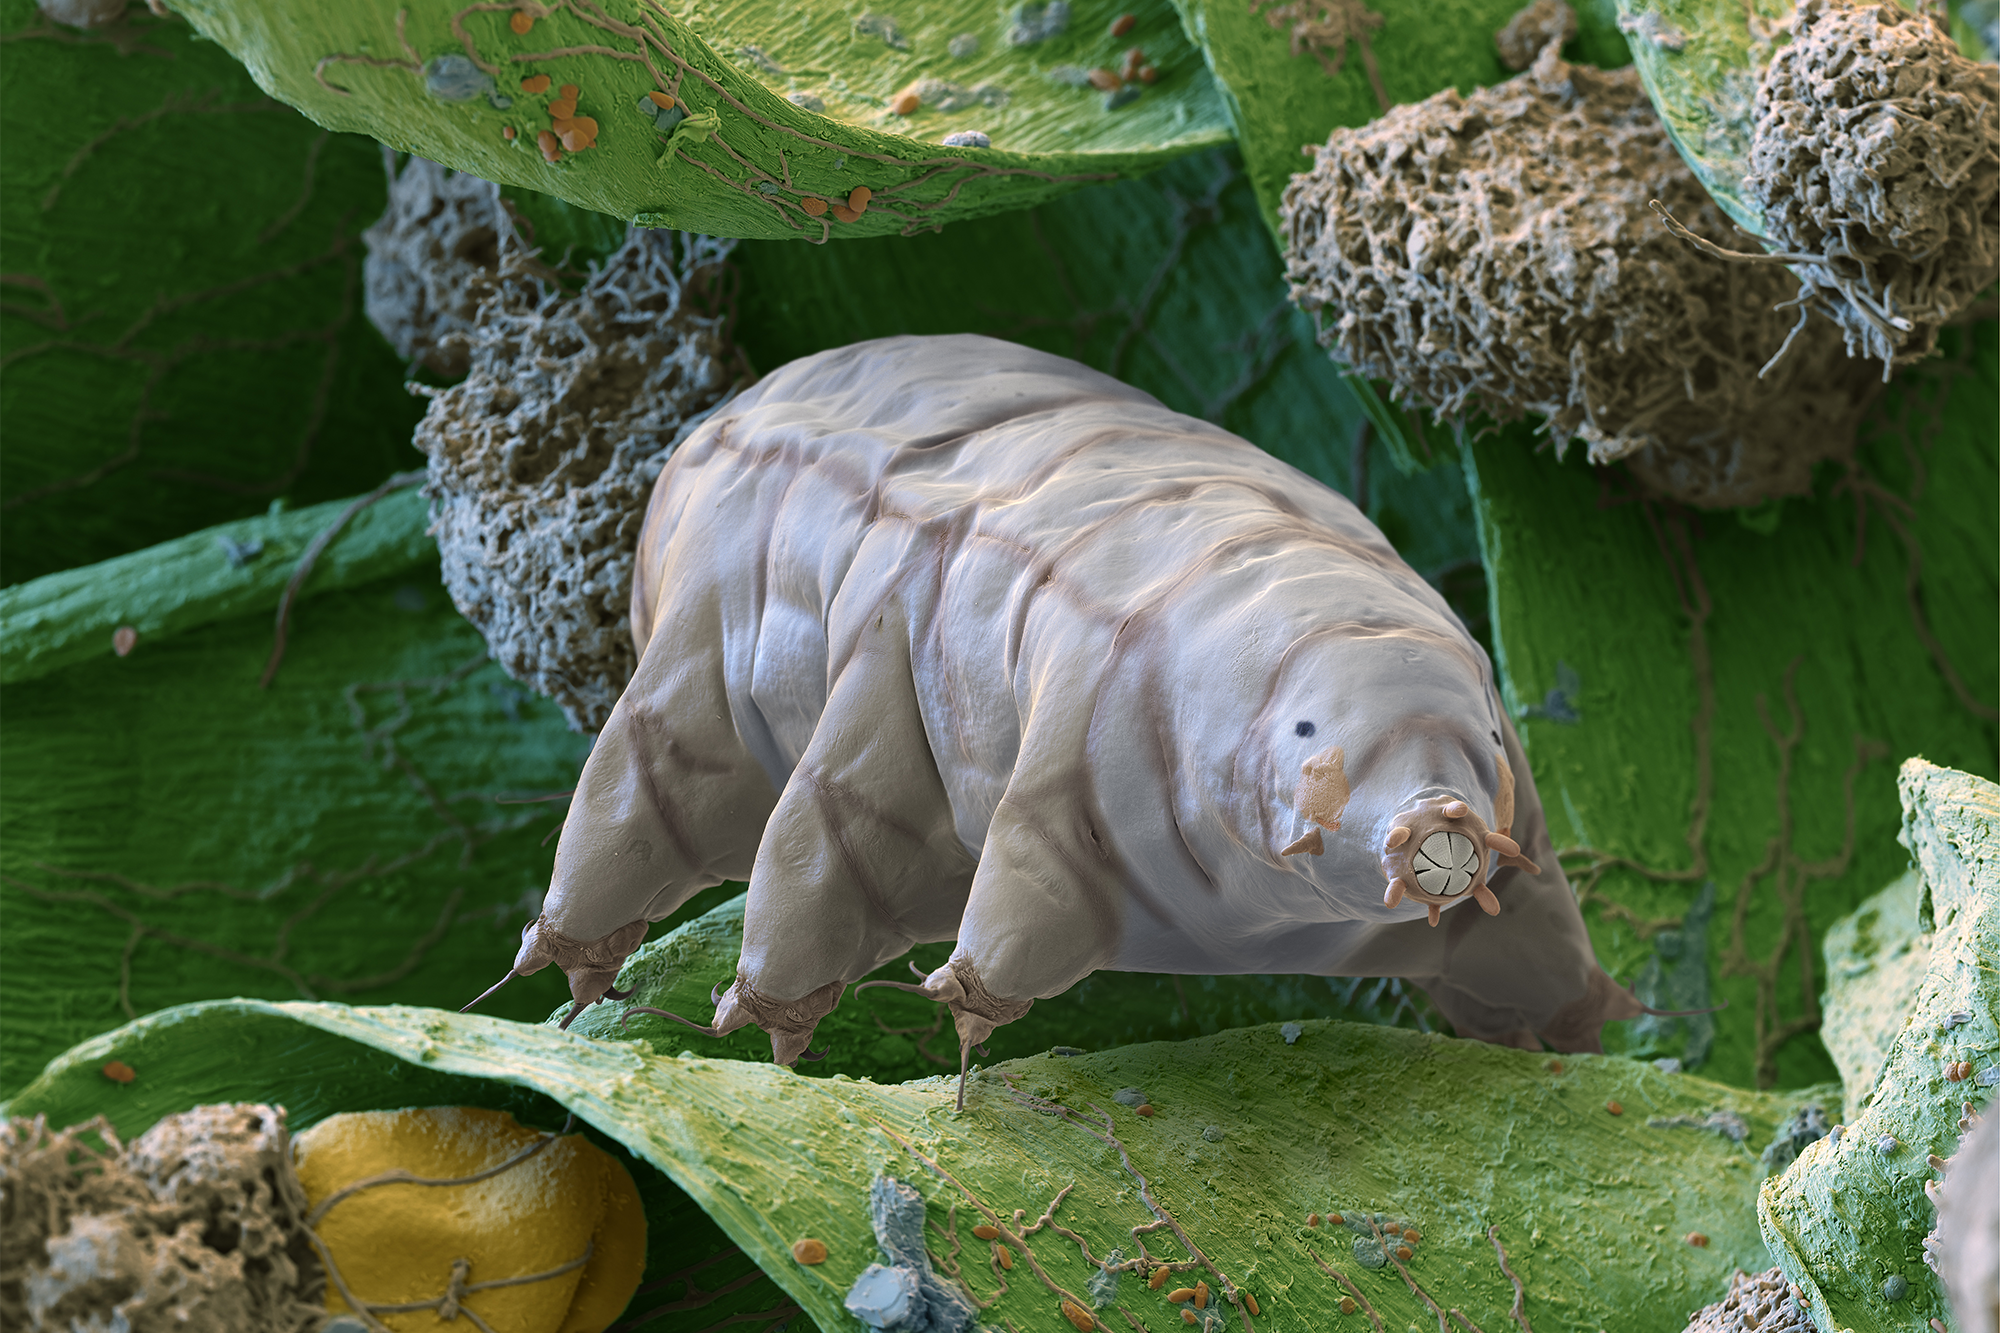 Cute Little Tardigrades Are Basically Indestructible, and Scientists Just Figured Out One Reason Why